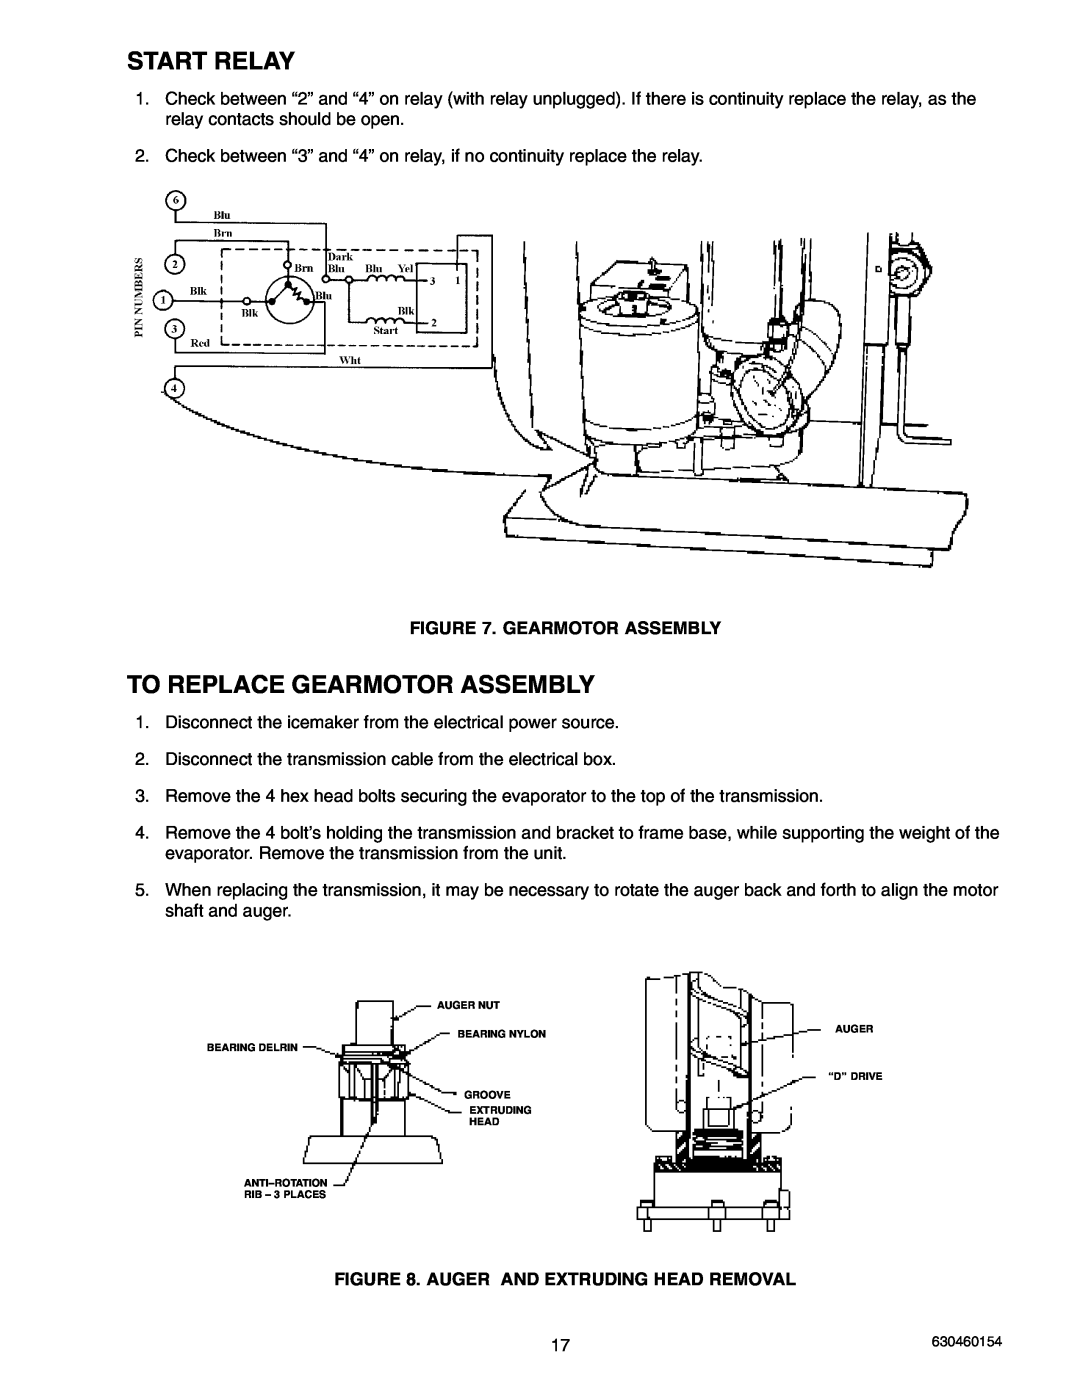 Cornelius UCR 700 Series service manual Start Relay, To Replace Gearmotor Assembly, Auger And Extruding Head Removal 